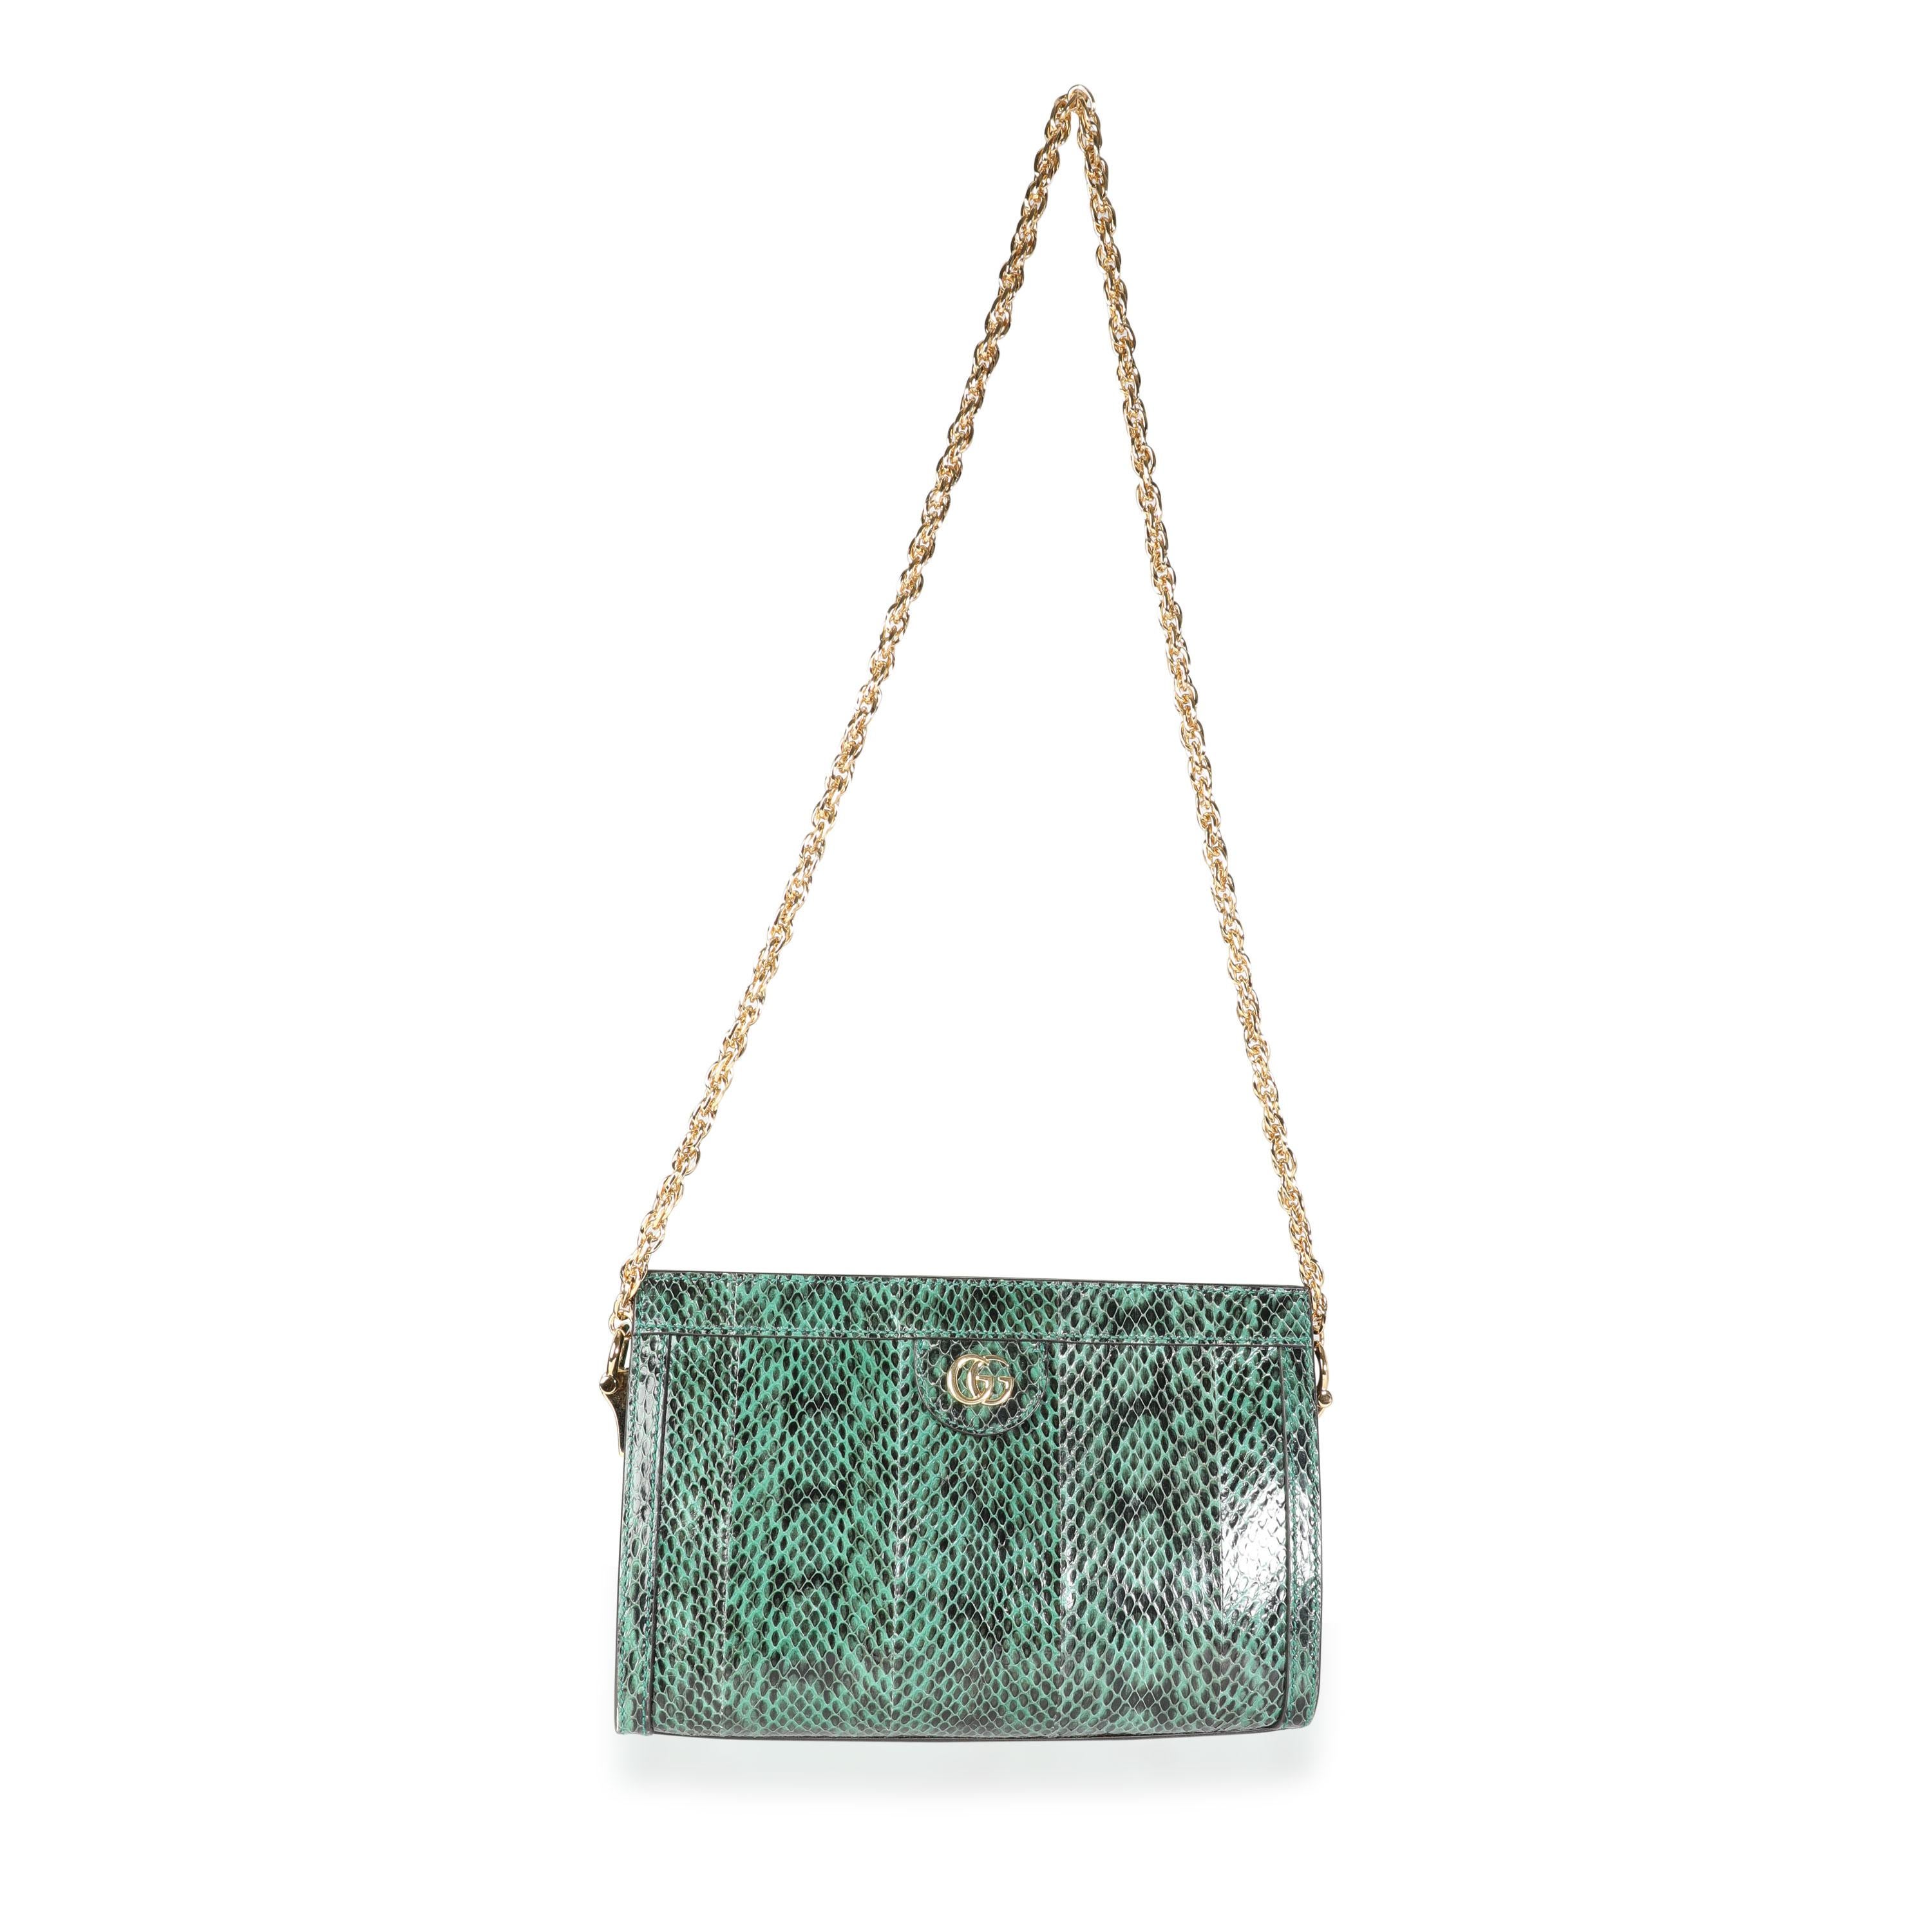 Listing Title: Gucci Emerald Snakeskin Small Ophidia Shoulder Bag
SKU: 114332
MSRP: 3900.00
Condition: Pre-owned (3000)
Handbag Condition: Very Good
Condition Comments: Very Good Condition. Light scratching to hardware. Scuffing to interior. Please